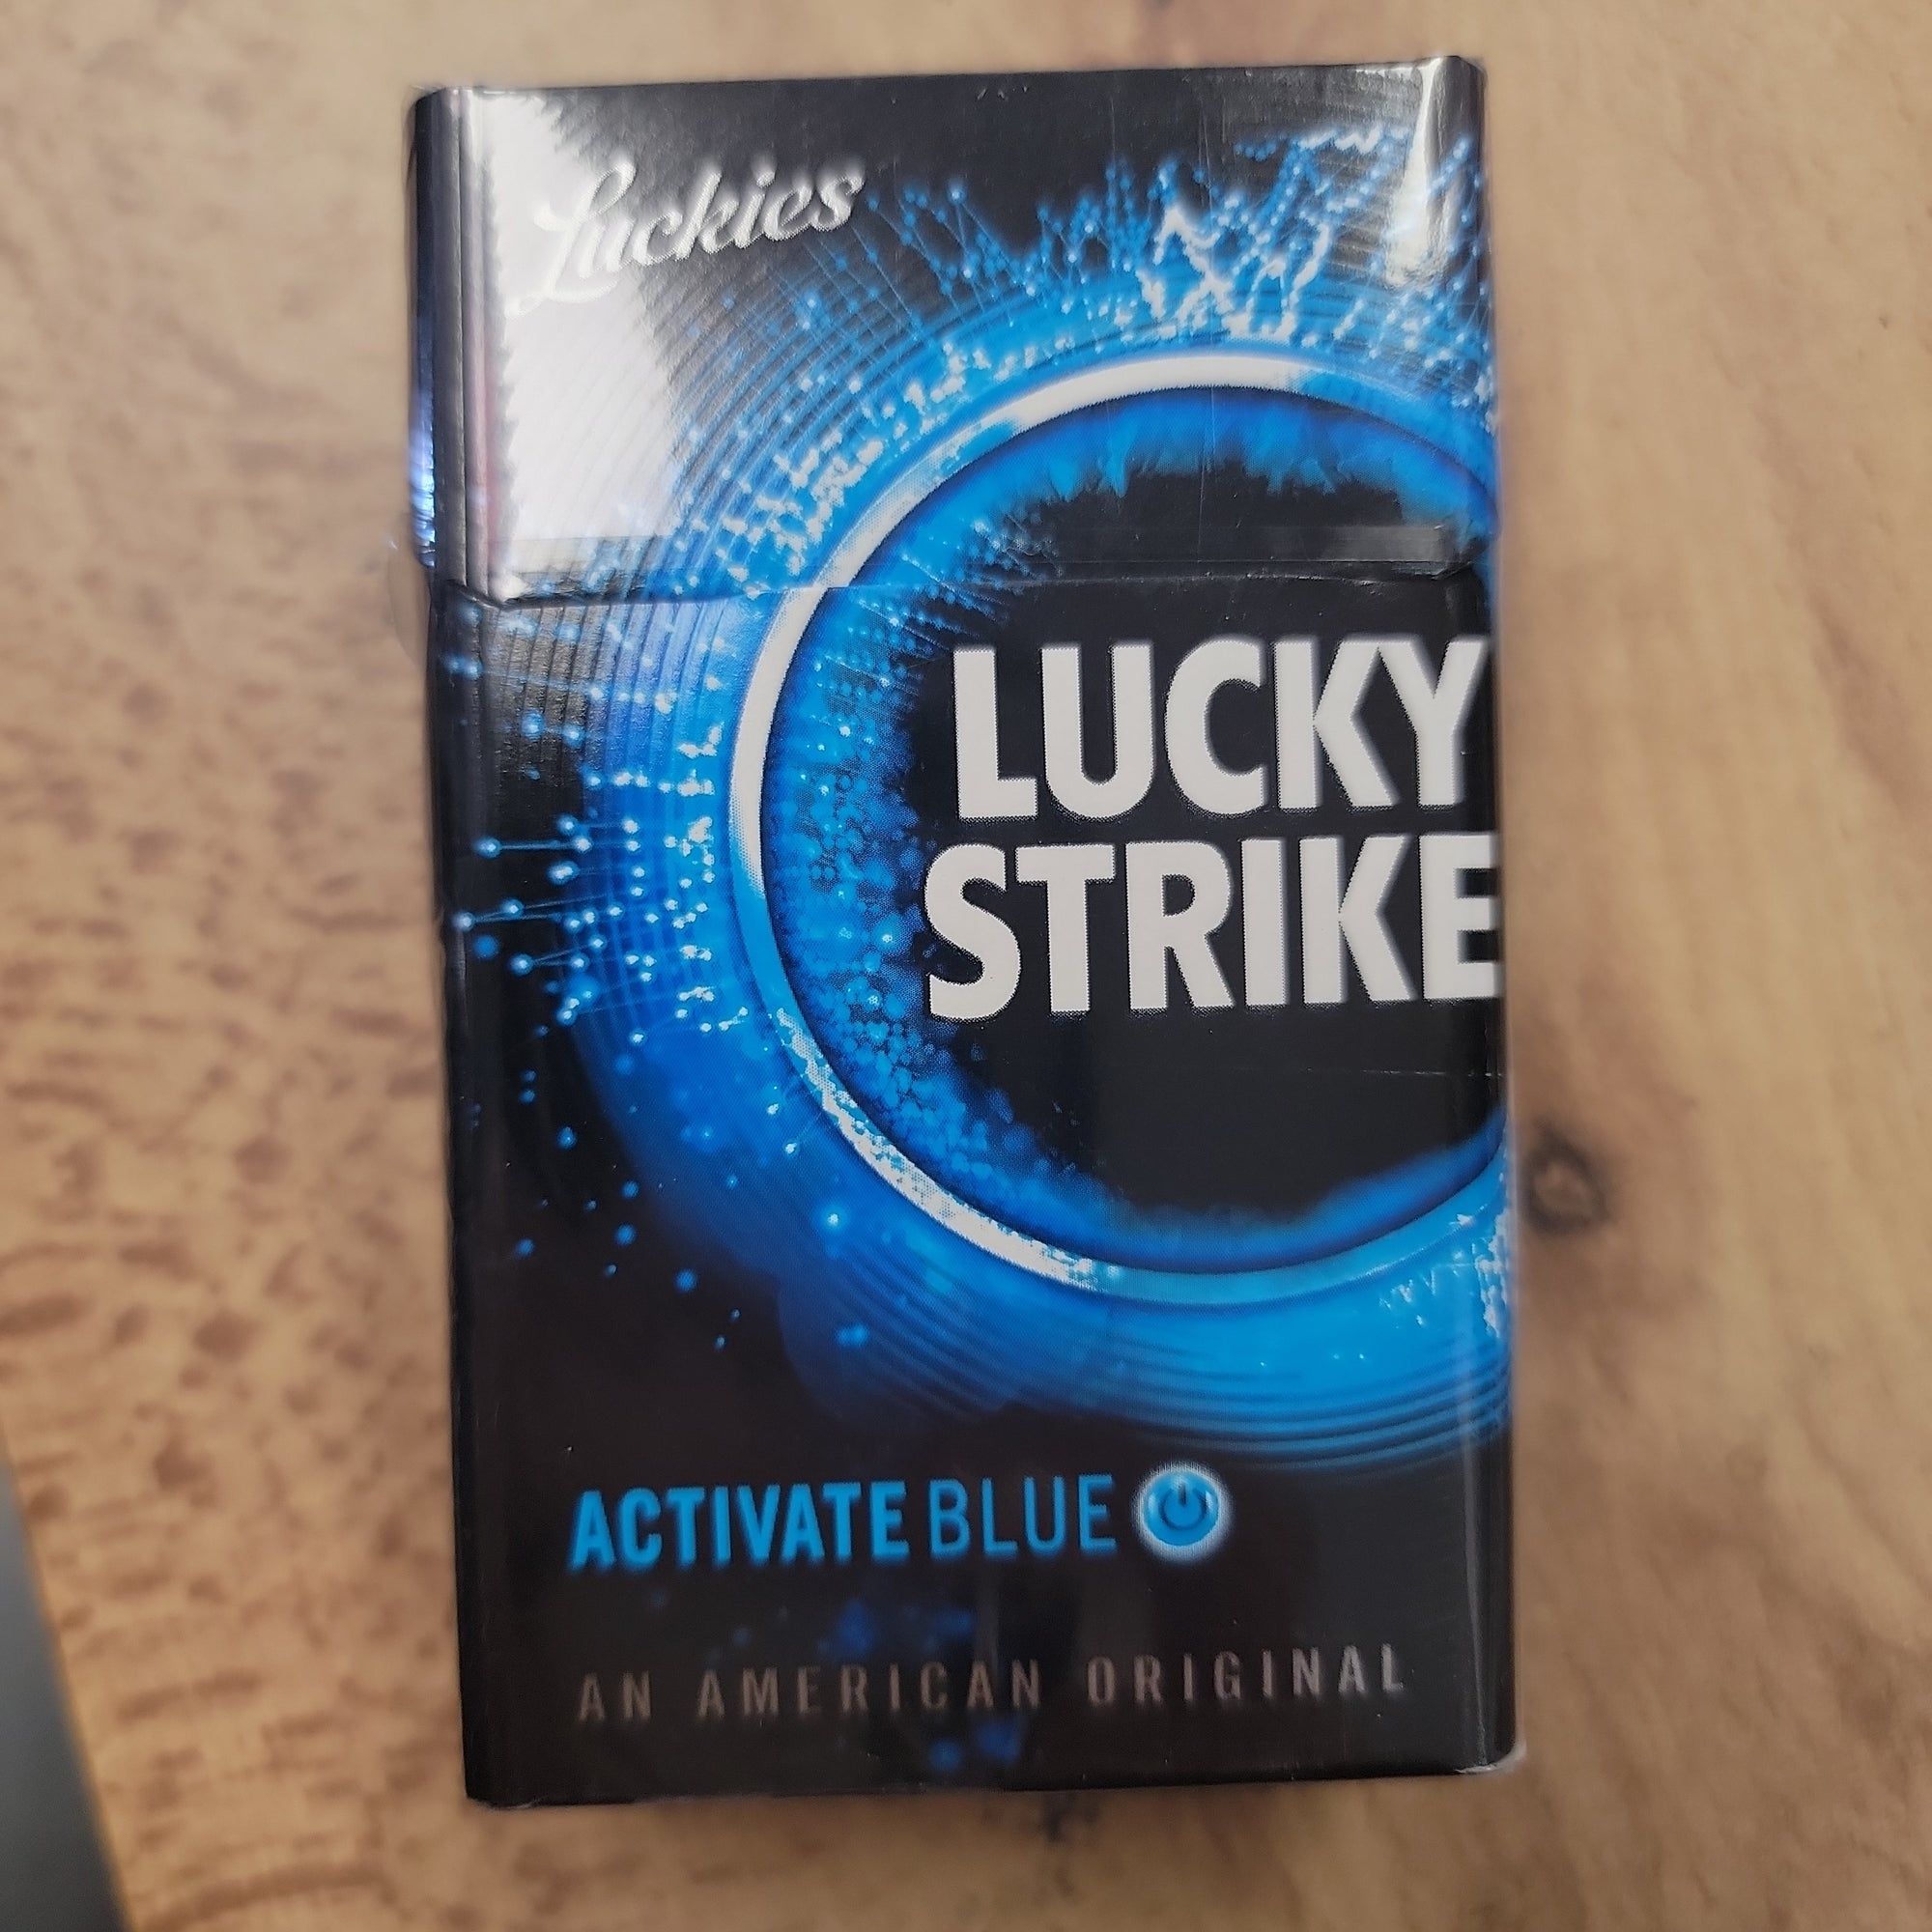 Lucky Strike activate blue